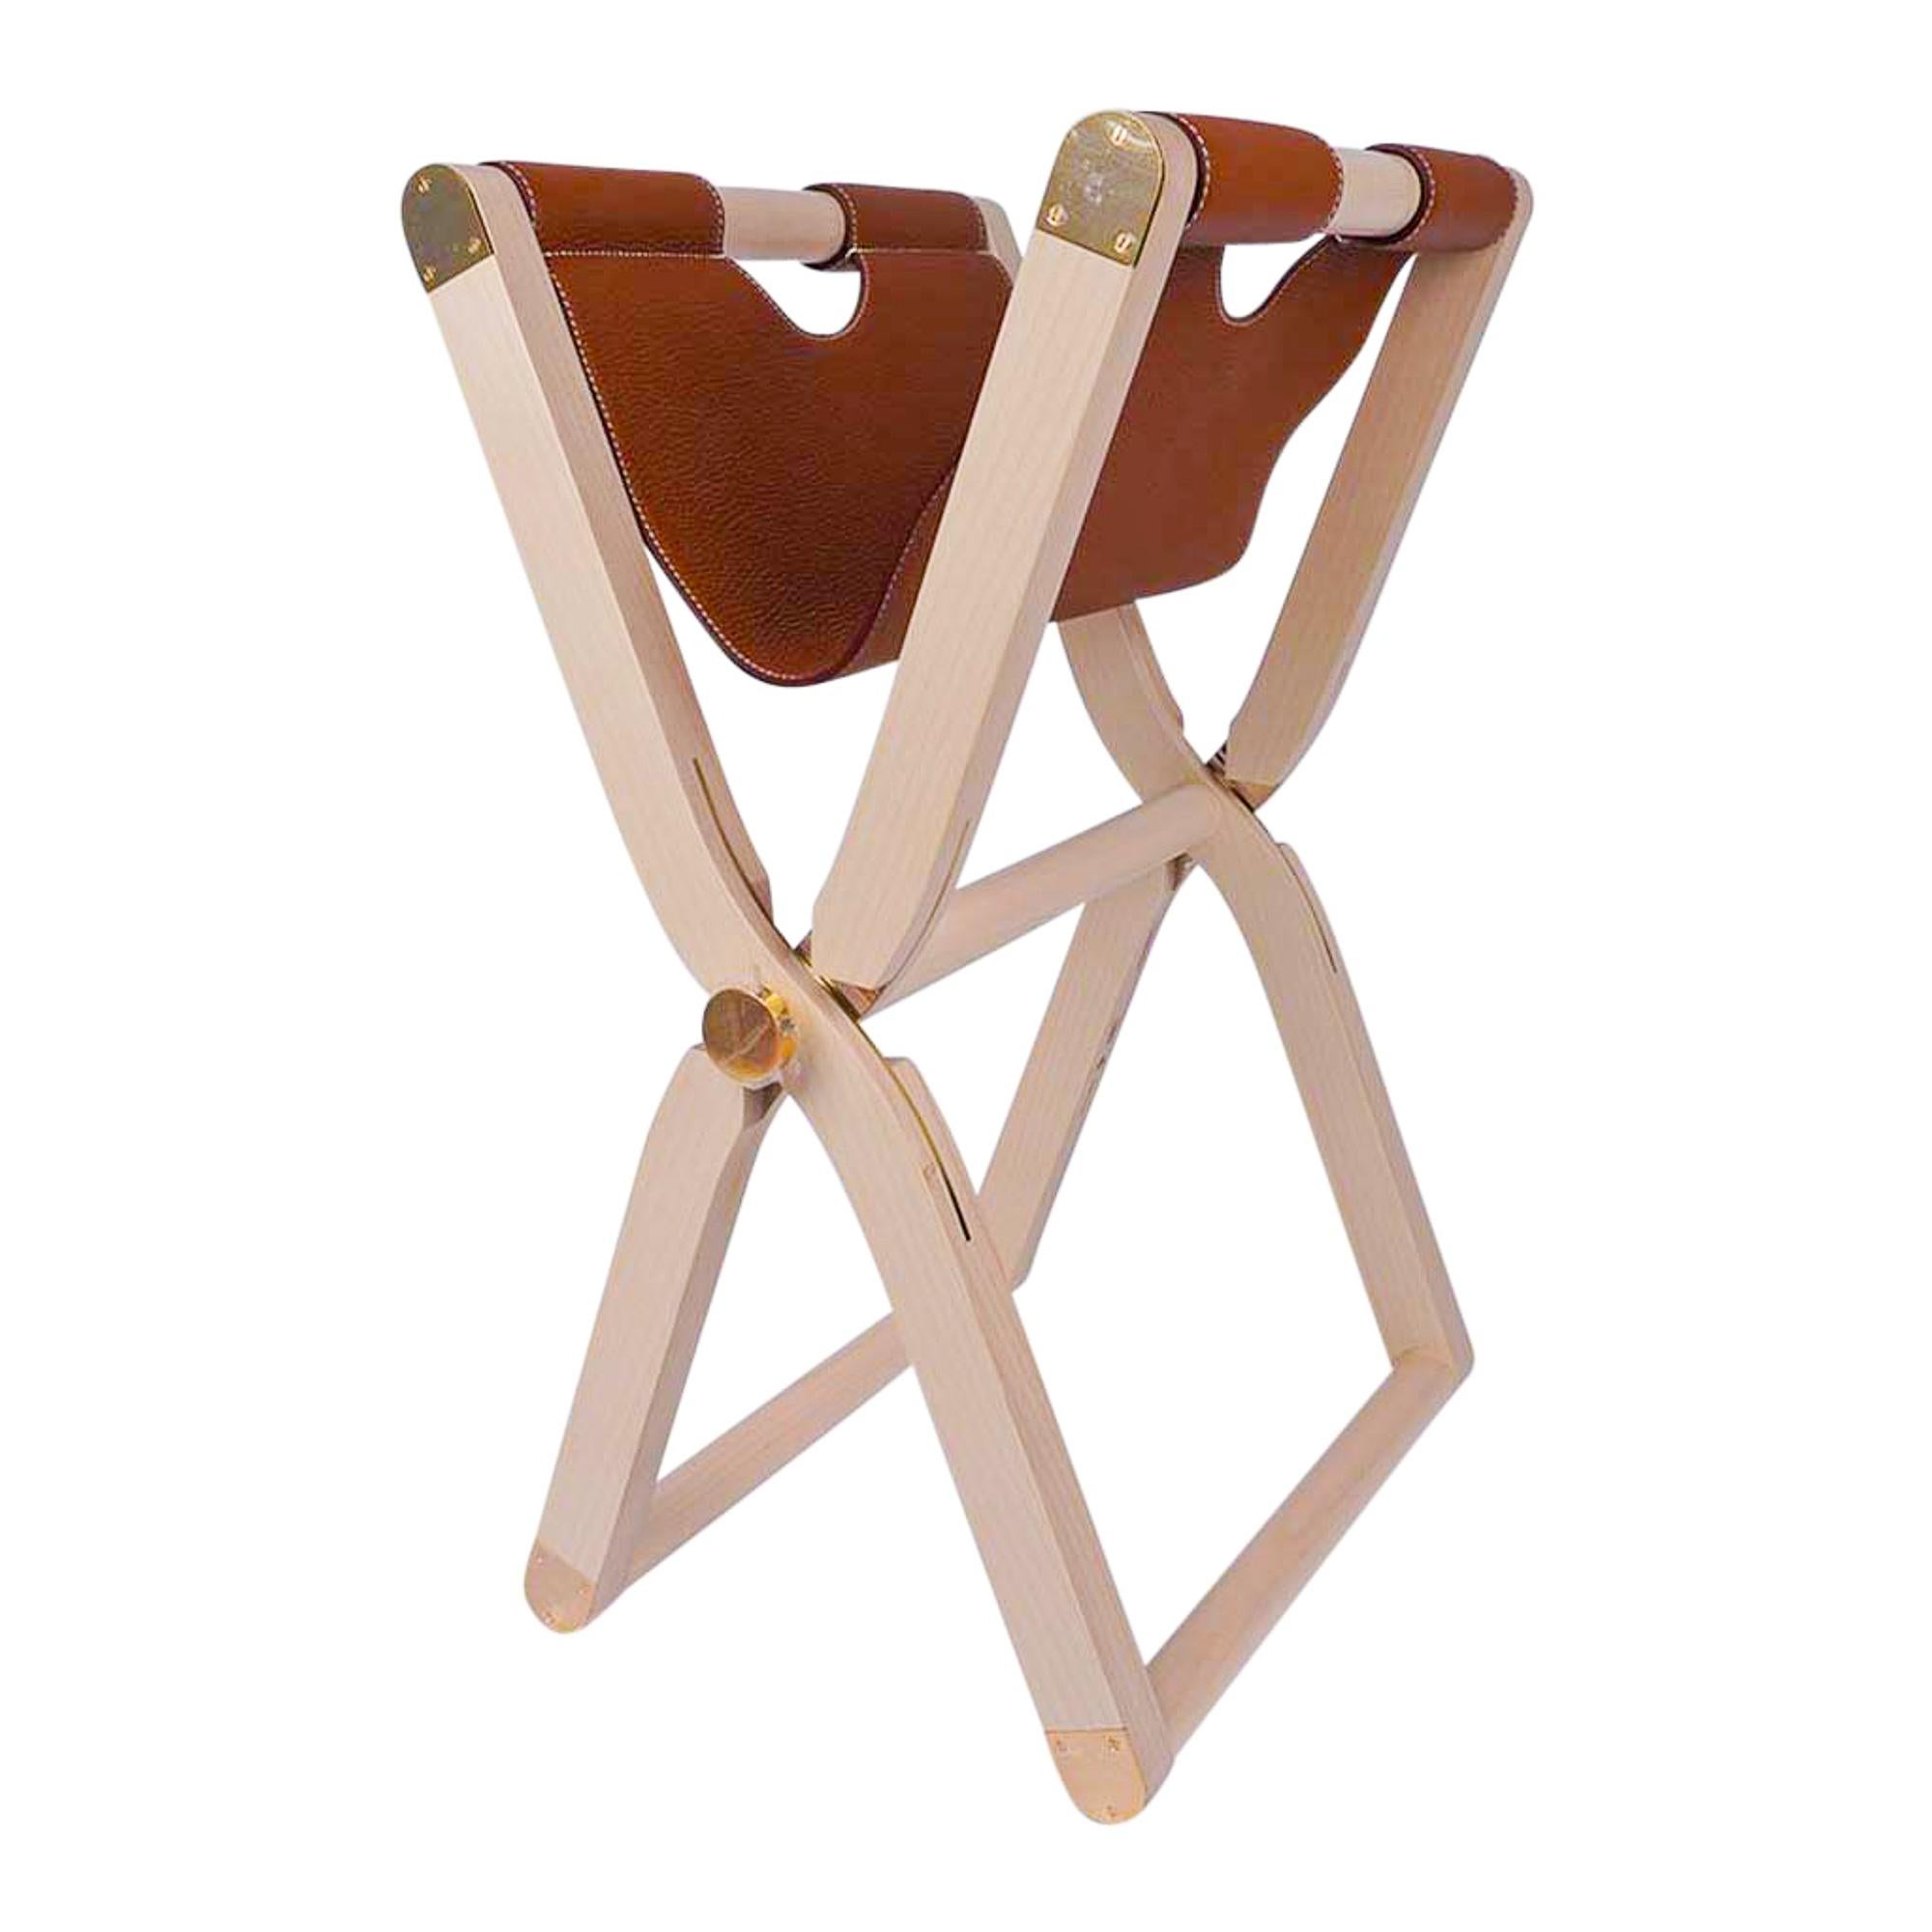 Mightychic offers an Hermes Pippa Stool features a natural maple frame.
The seat is a Gold Taurillon Clemence with White Topstitch.
Enhanced with brass hardware.
The line of foldable pieces was inspired by Rene Dumas and Peter Cole.
Made in